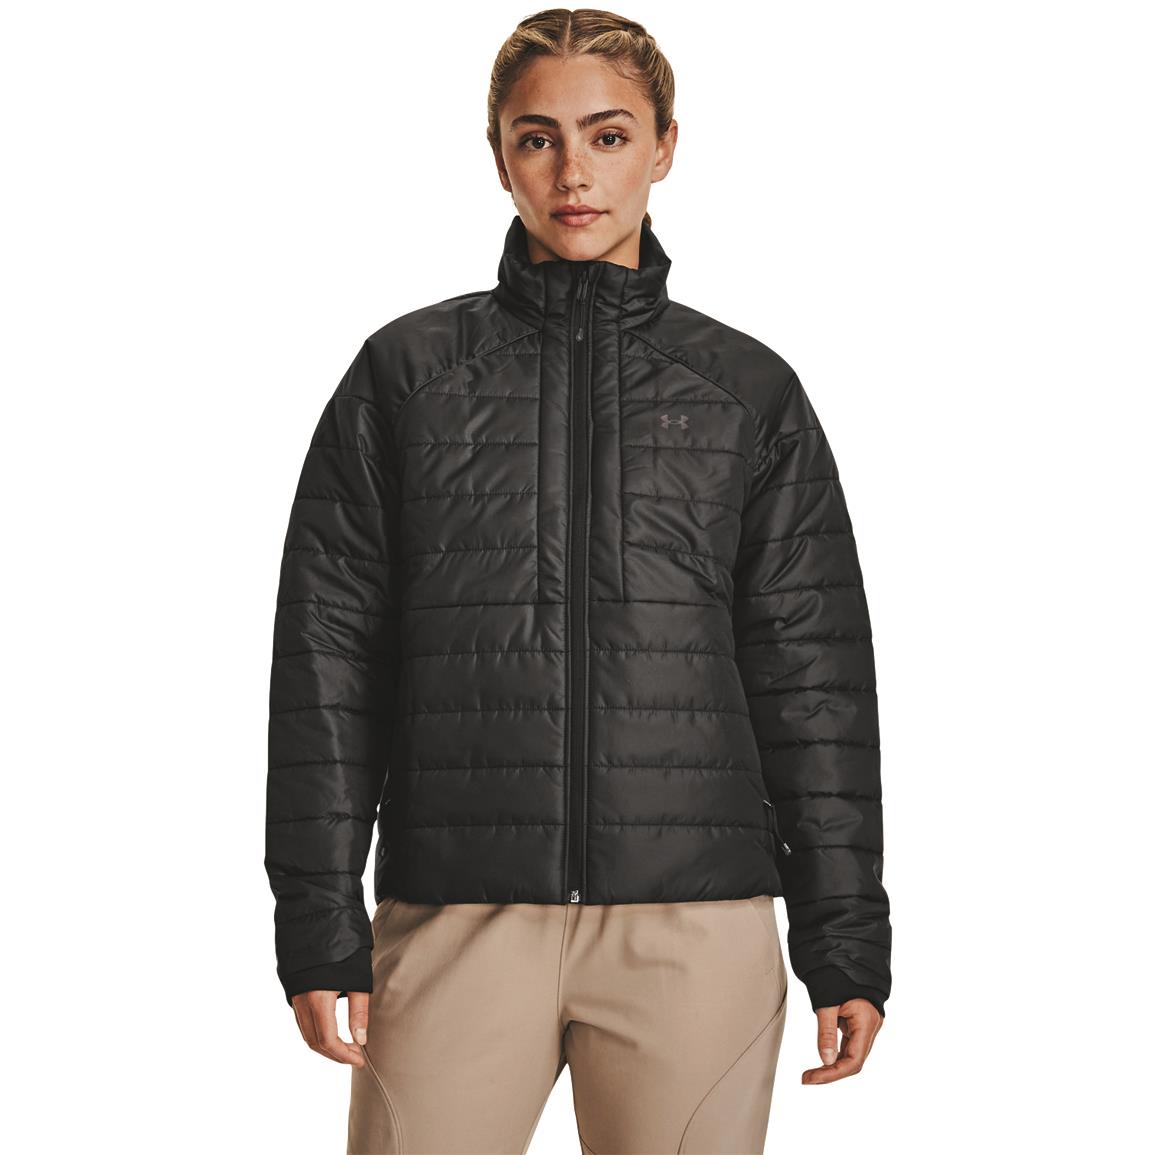 Under Armour Women's Storm Insulated Jacket, Black/ Jet Gray